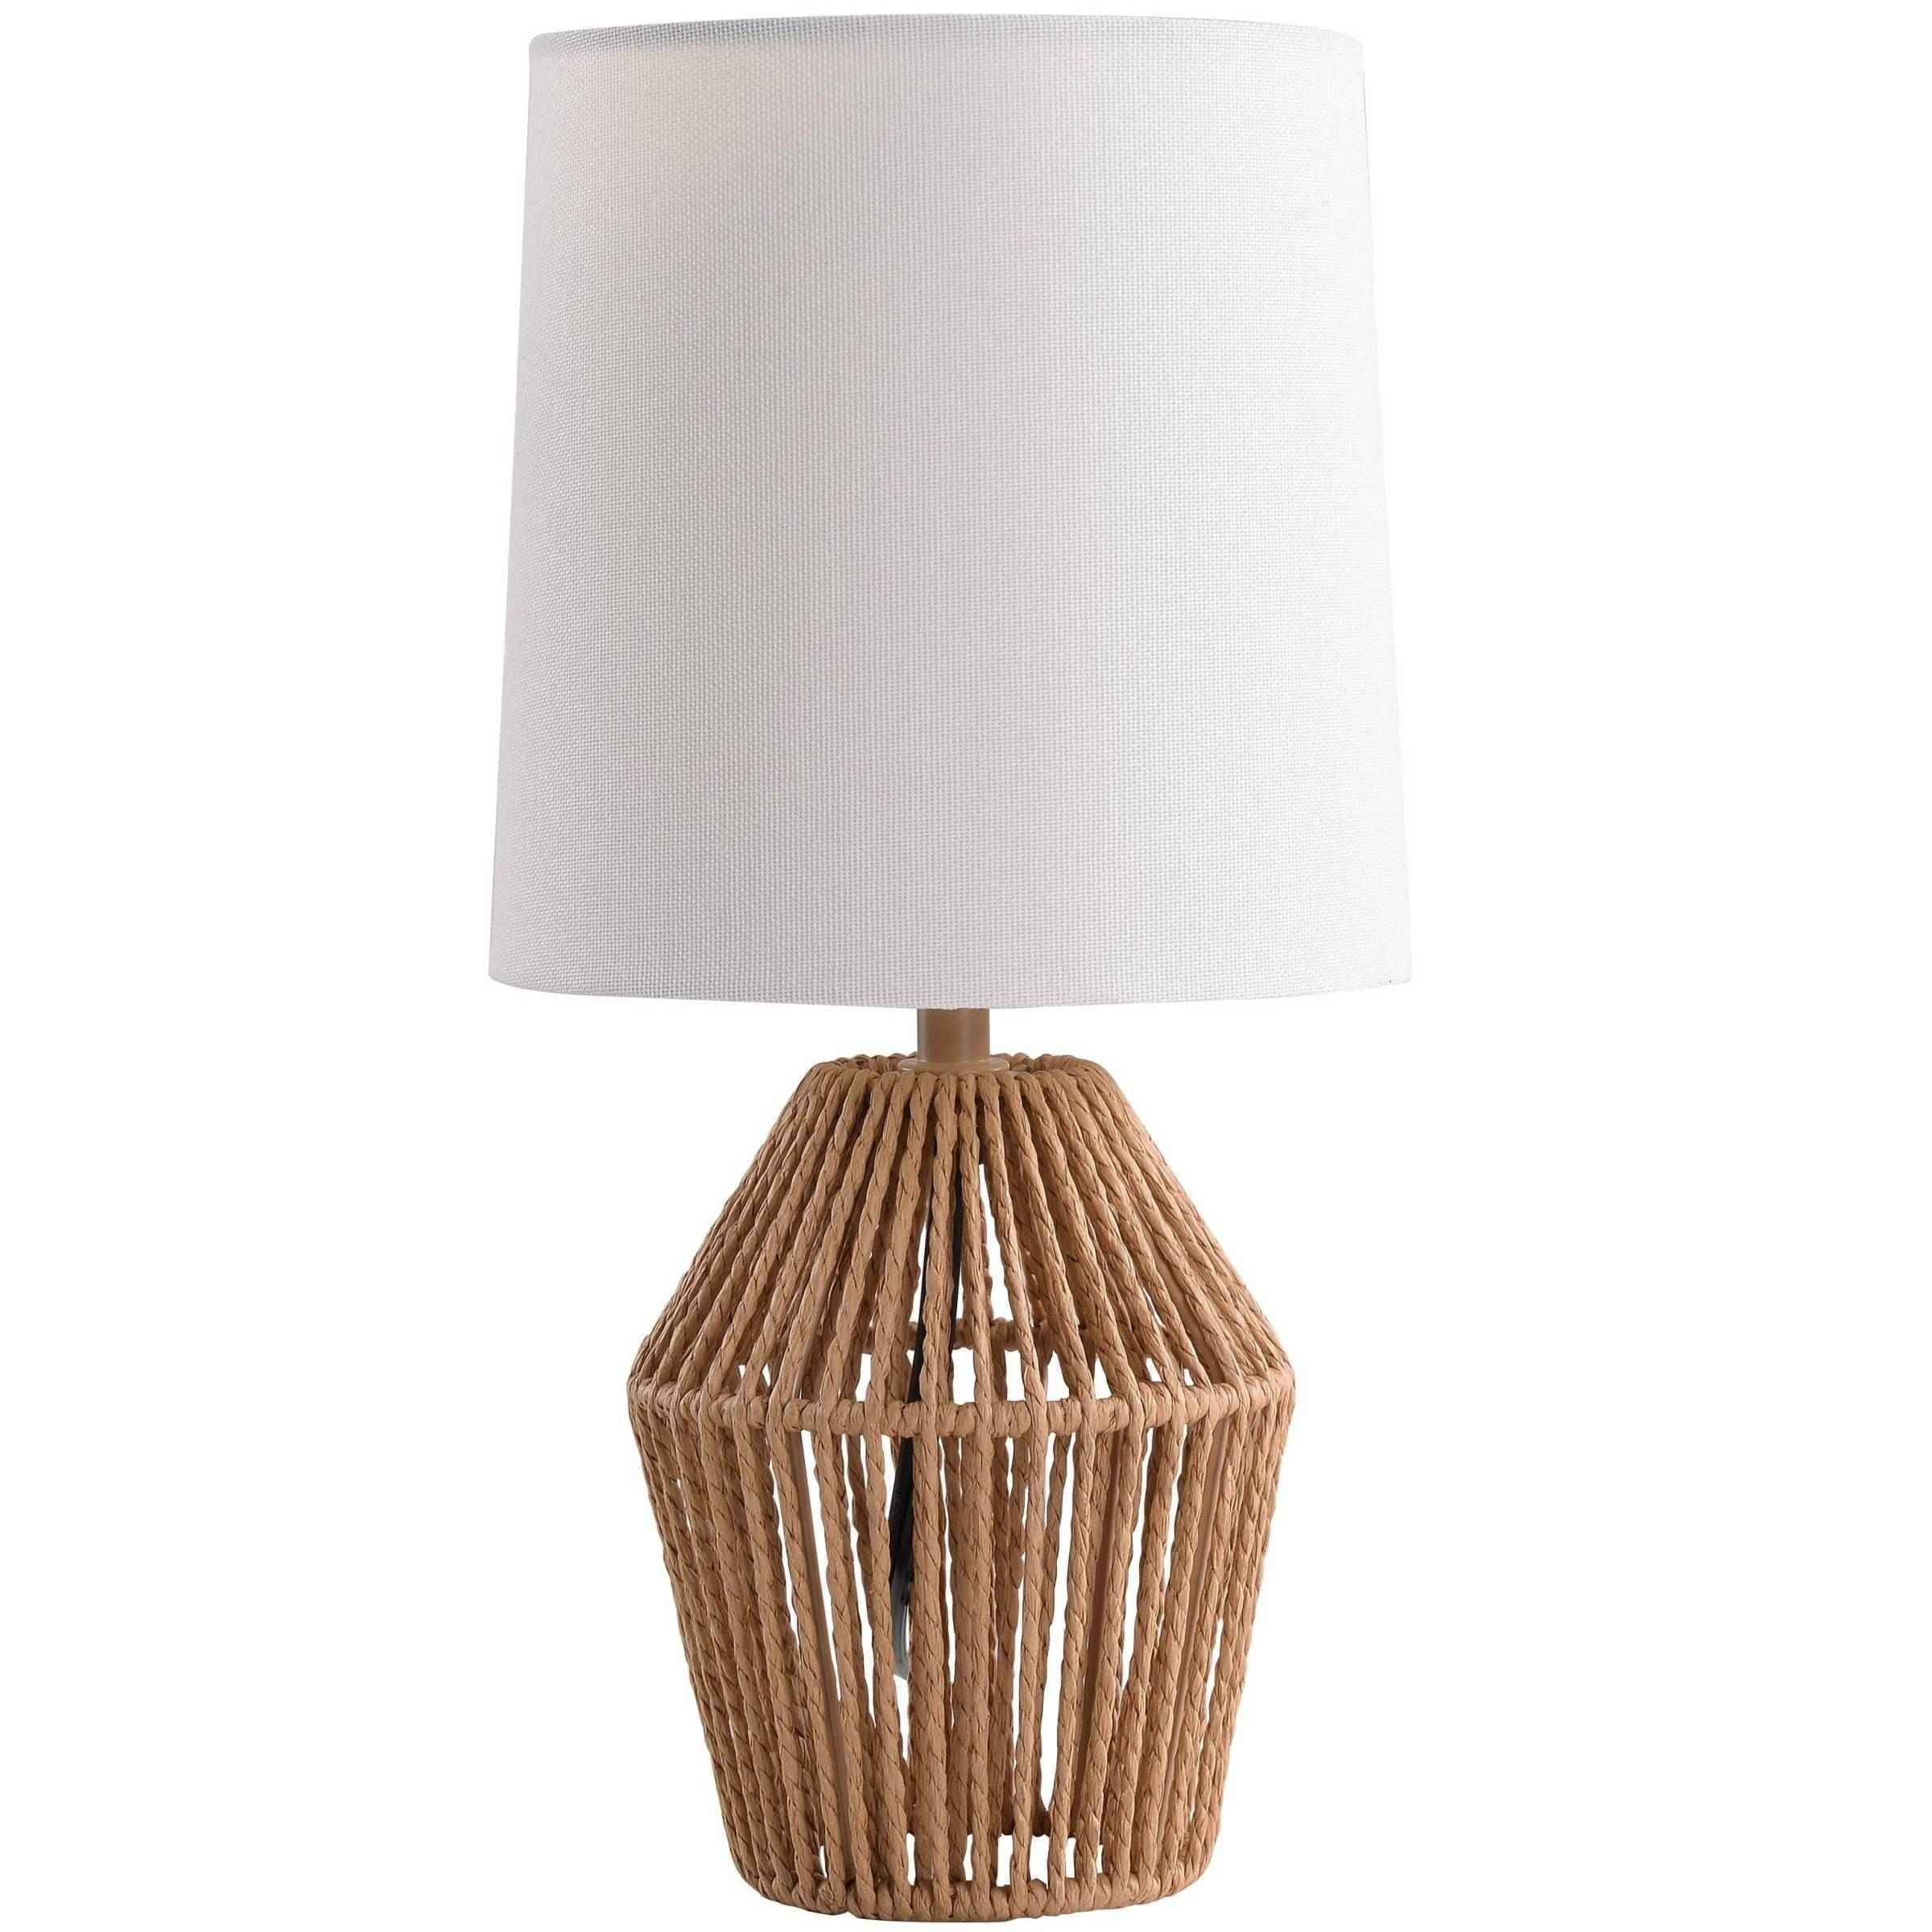 Mainstays Mini Rattan Table Lamp with Shade 12.75"H- Natural Color Finish and Boho Style - Walmar... | Walmart (US)